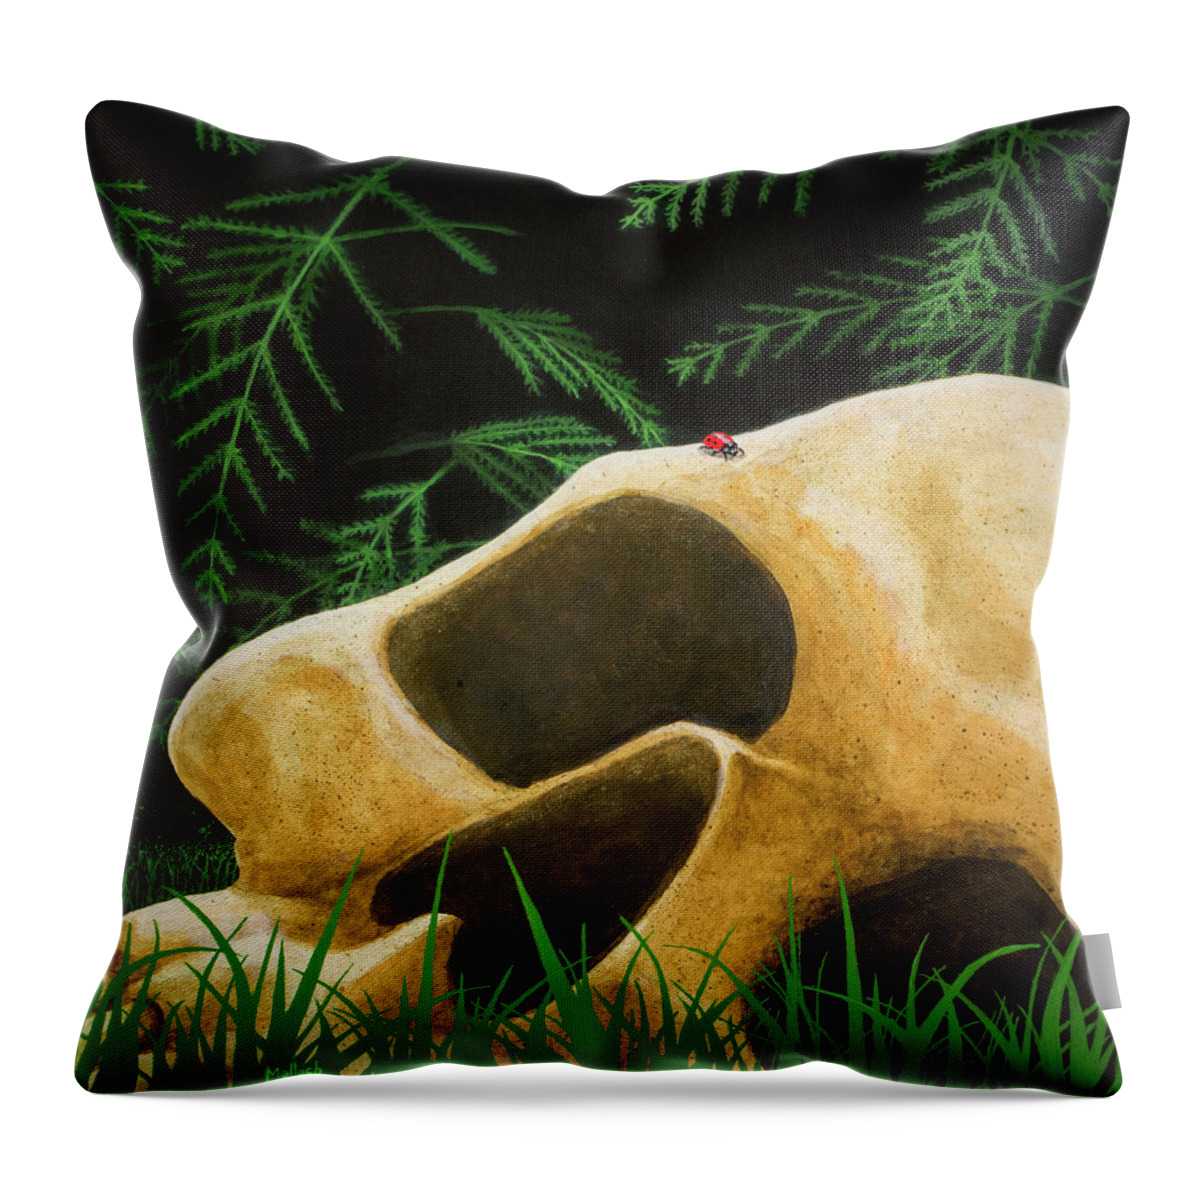 Ladybug Throw Pillow featuring the painting Still Life by Jack Malloch